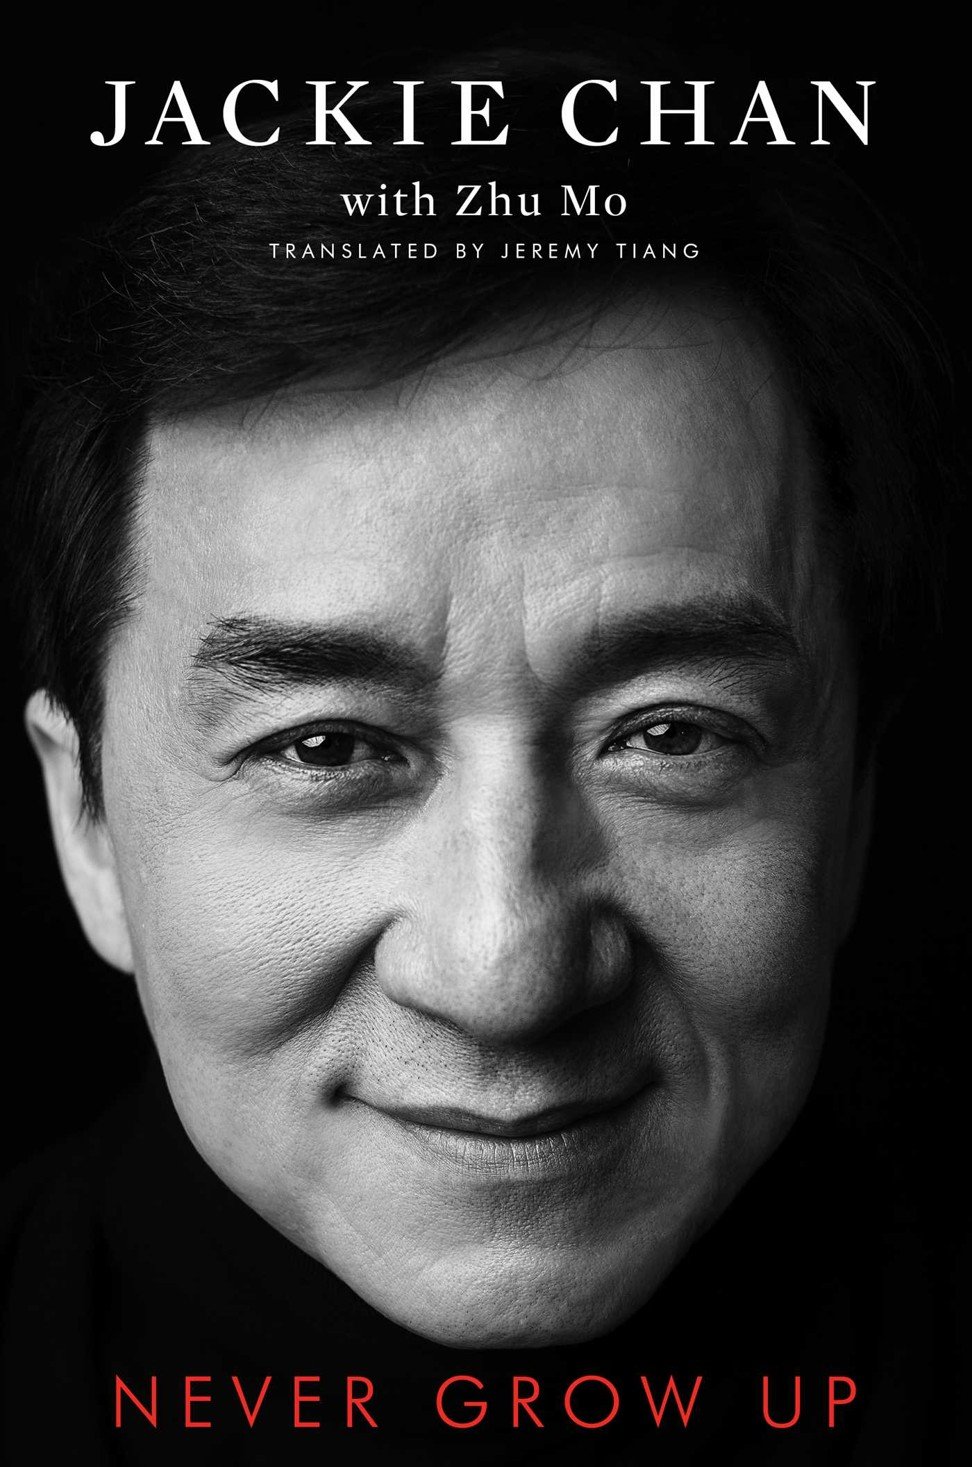 The front cover of Jackie Chan’s new memoir. Photo: Handout